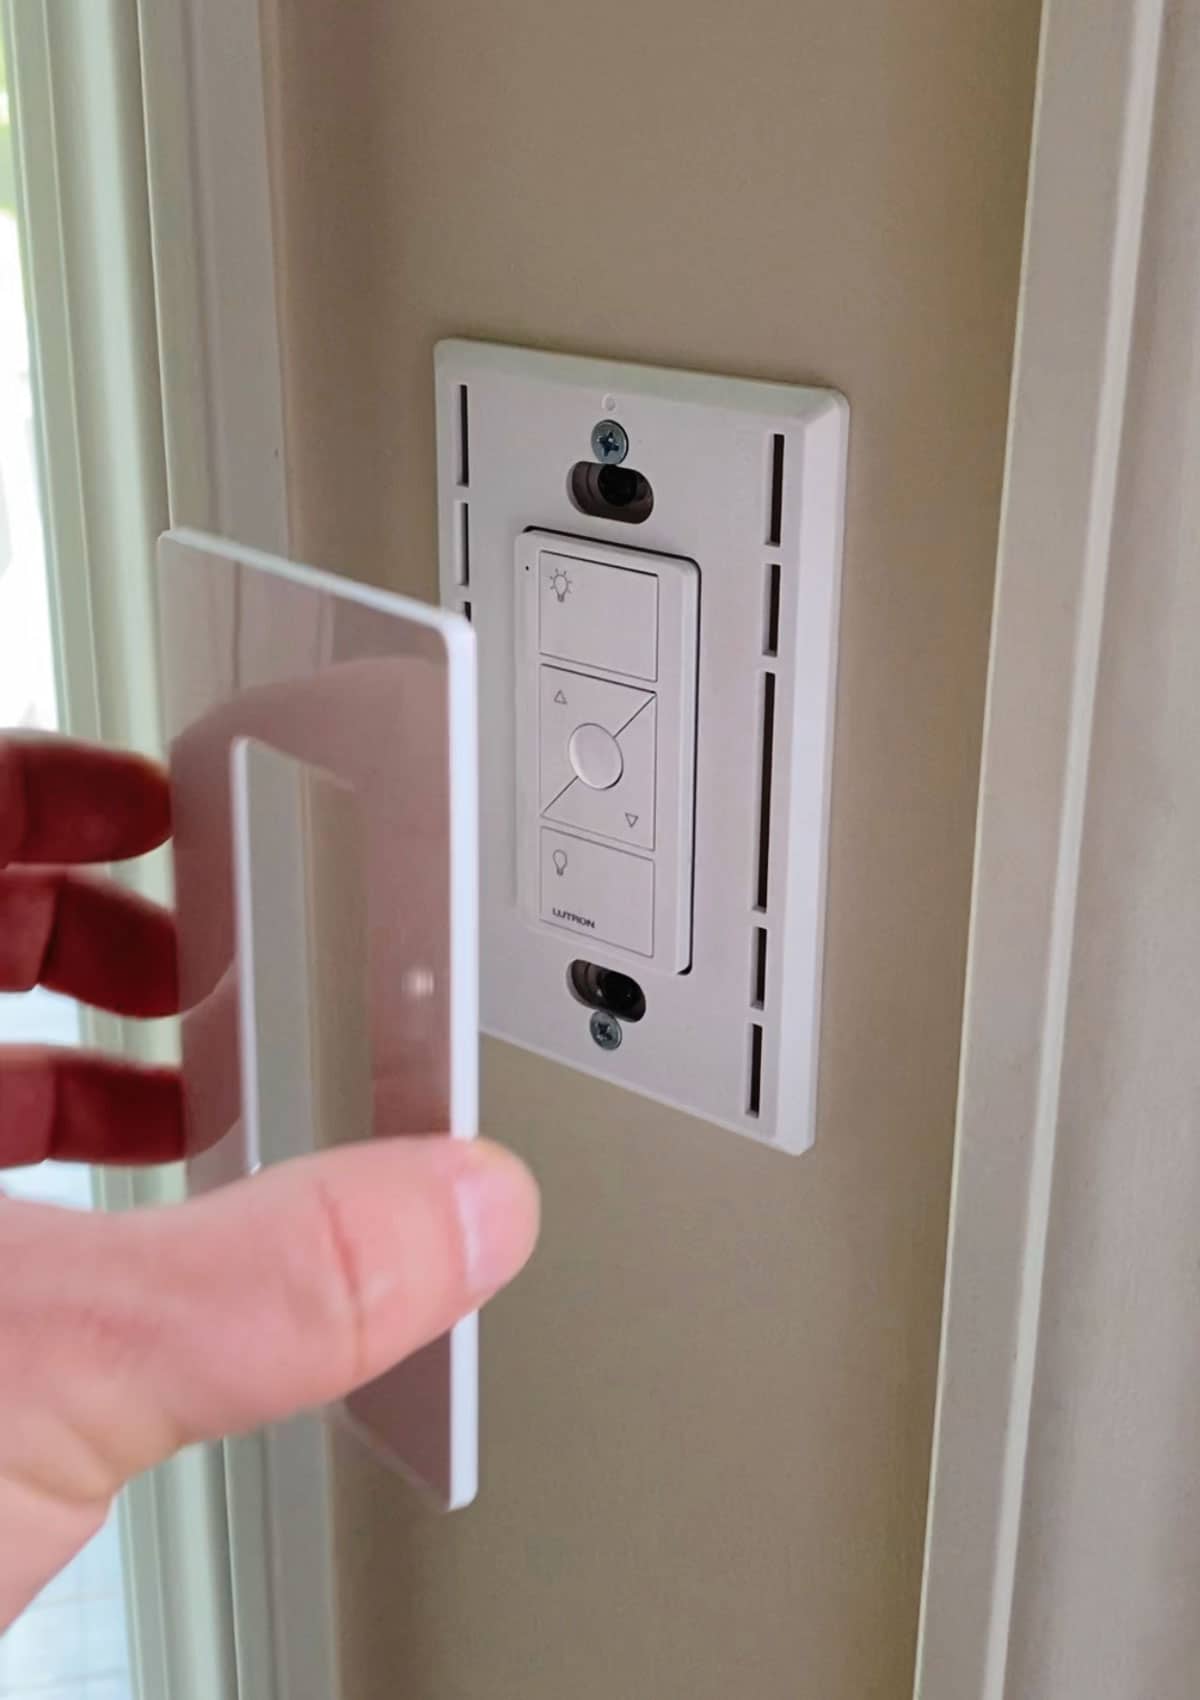 Using the Pico Remote with the Caséta by Lutron smart lighting system